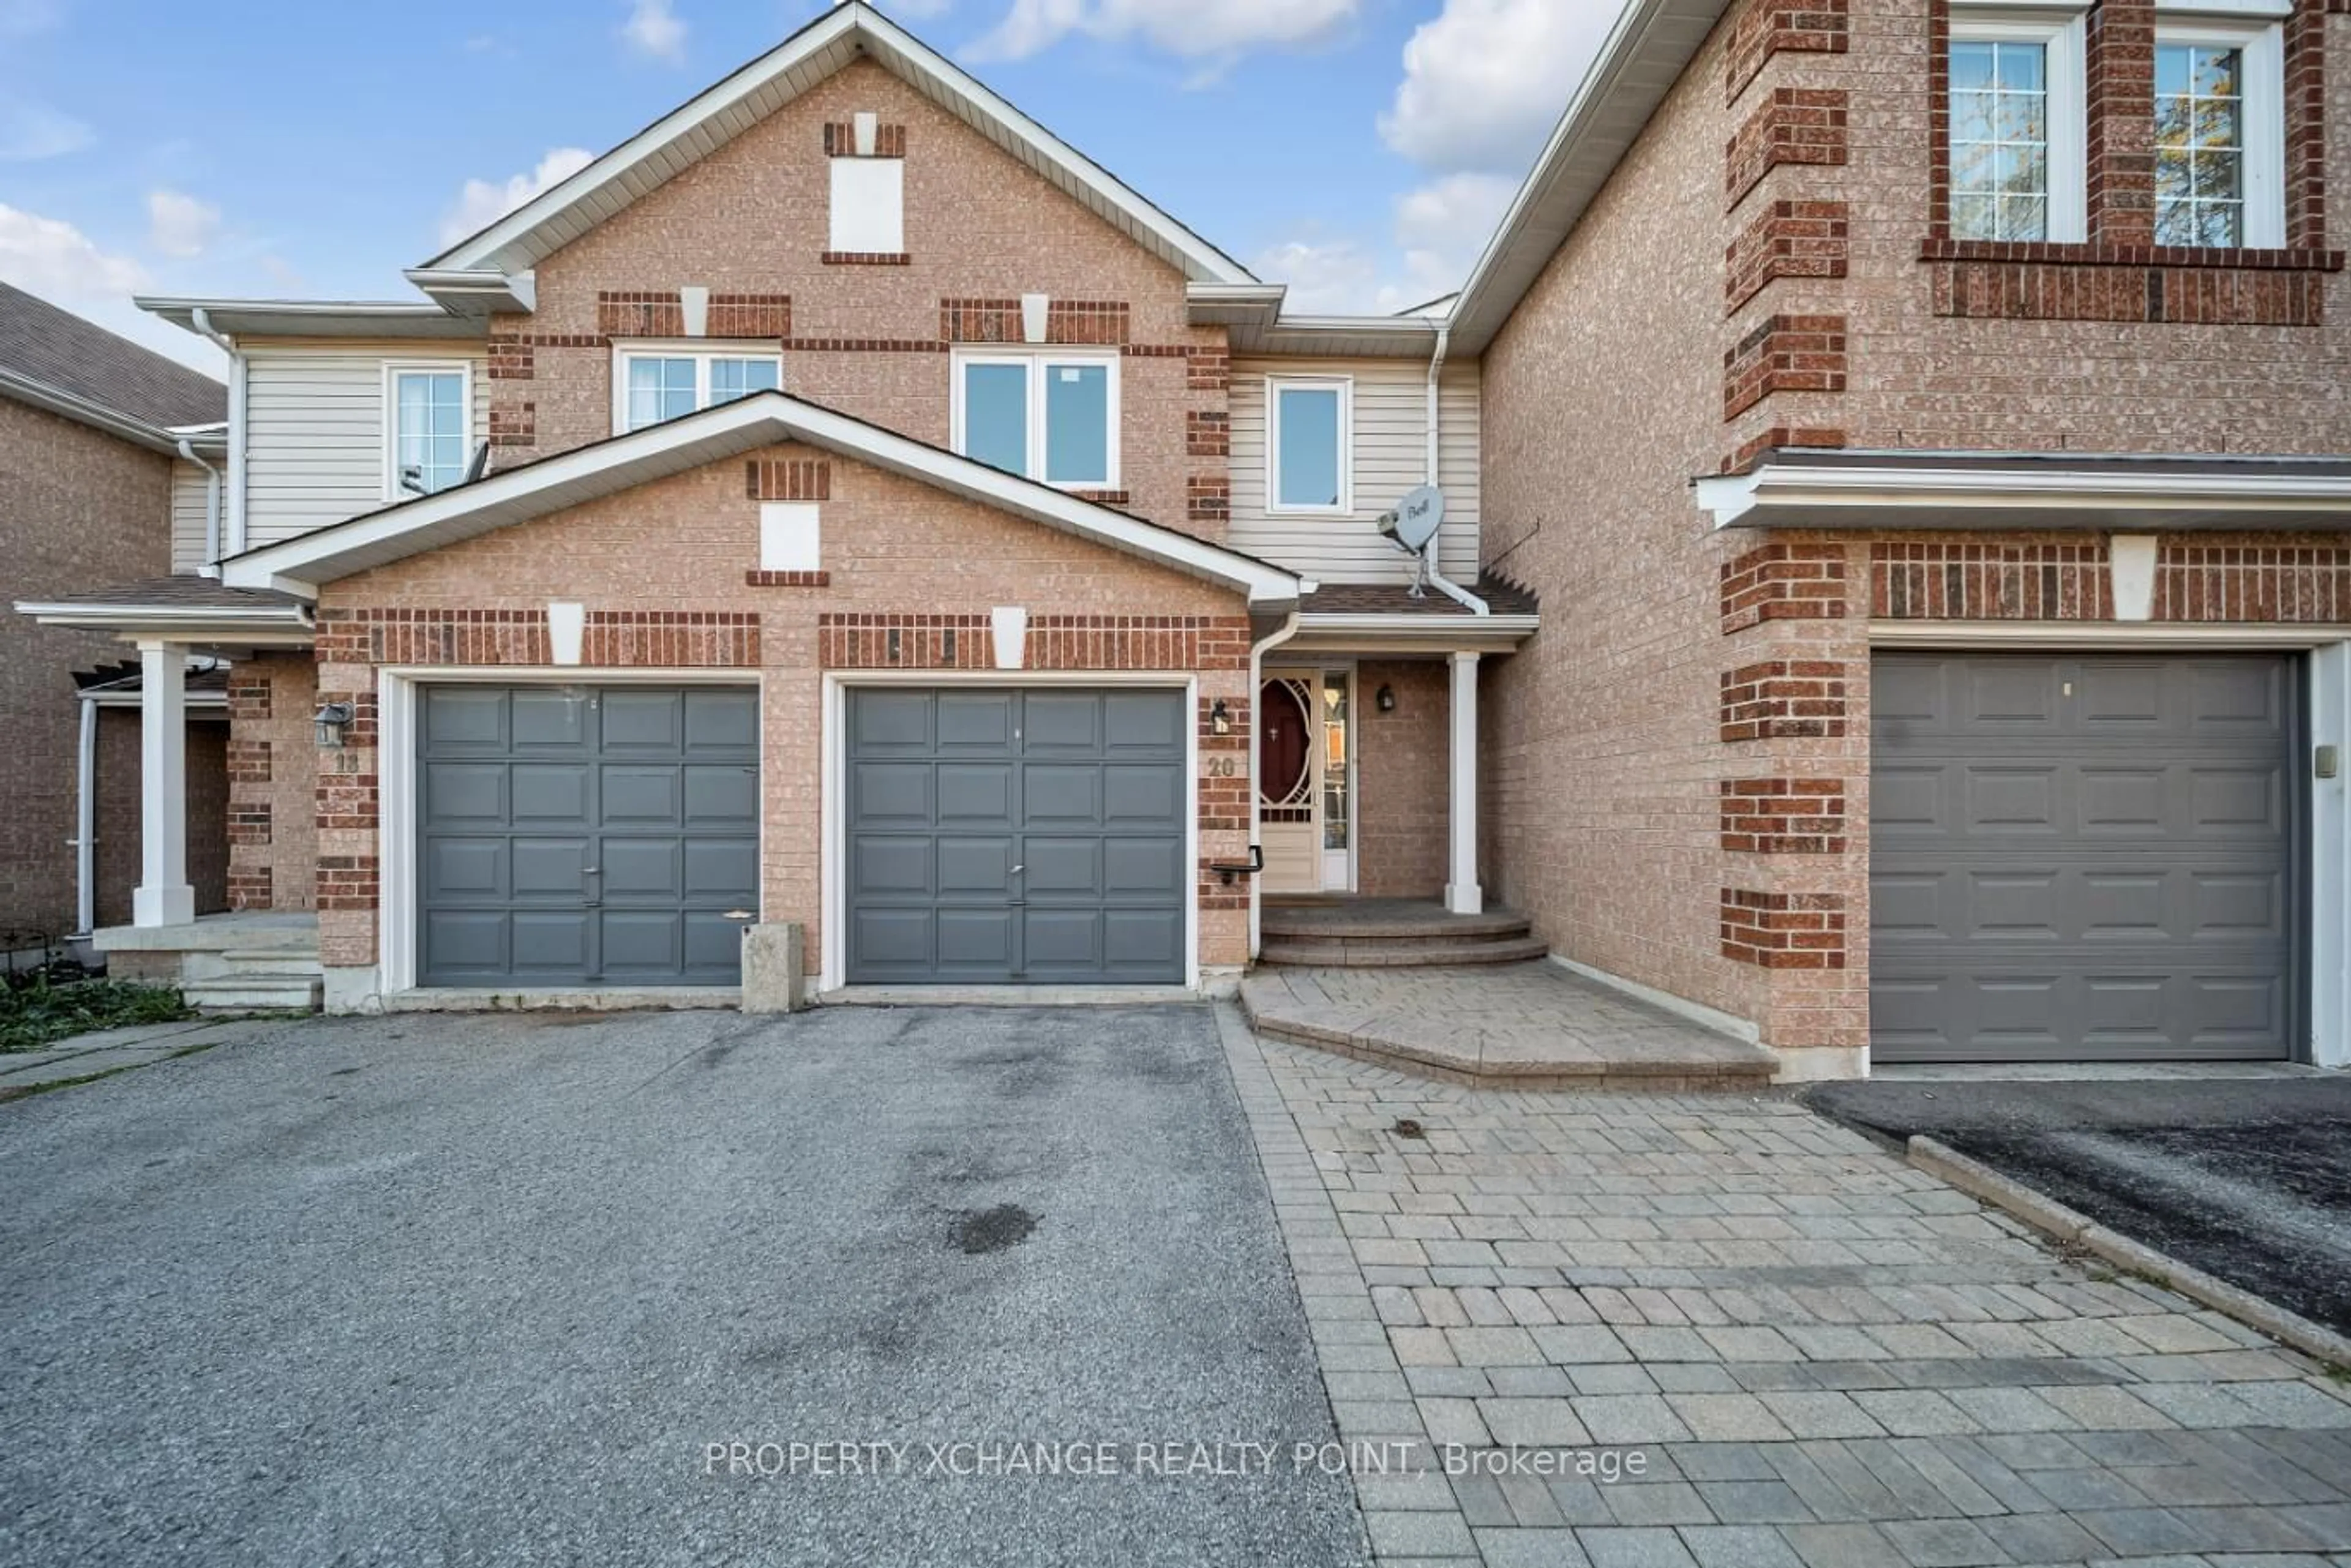 Home with brick exterior material for 20 Lick Pond Way, Whitby Ontario L1N 9K5